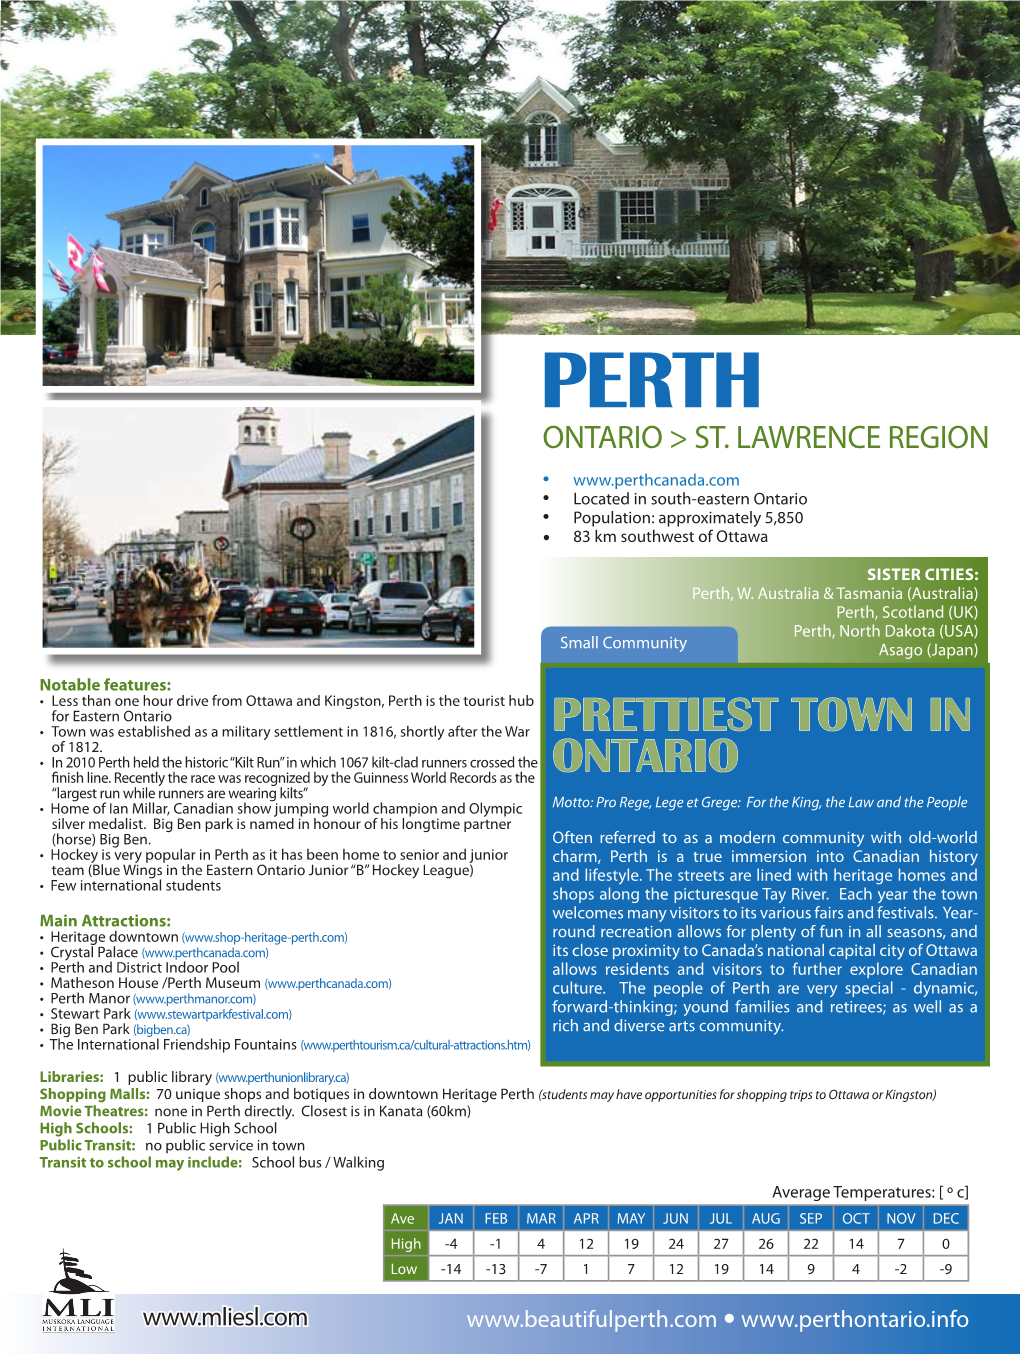 Visit and Study in Perth, Ontario